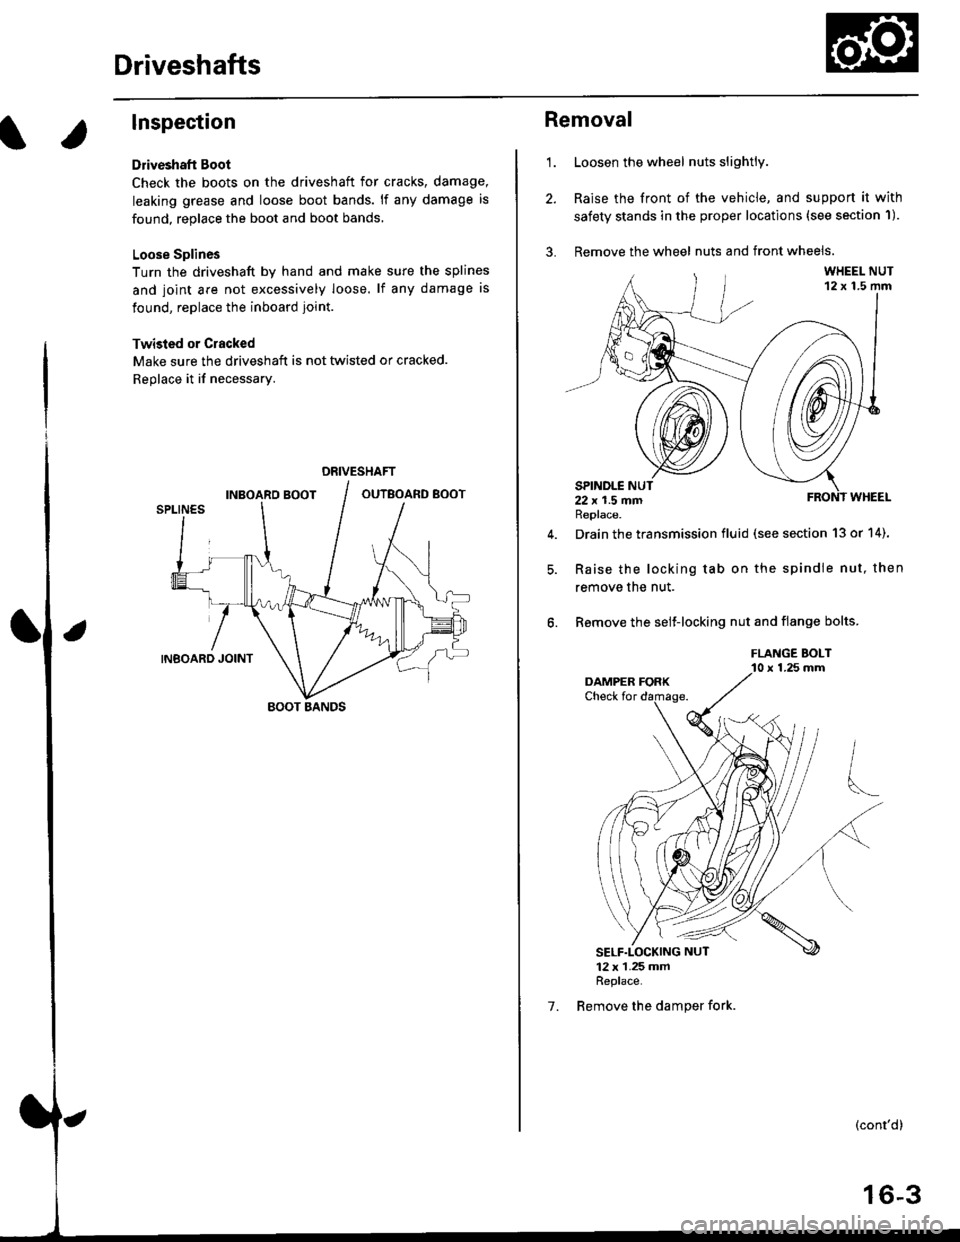 HONDA CIVIC 1998 6.G Workshop Manual Driveshafts
Inspection
Driveshaft Boot
Check the boots on the driveshaft for cracks, damage,
leaking grease and loose boot bands. lf any damage is
found, replace the boot and boot bands,
Loose Splines